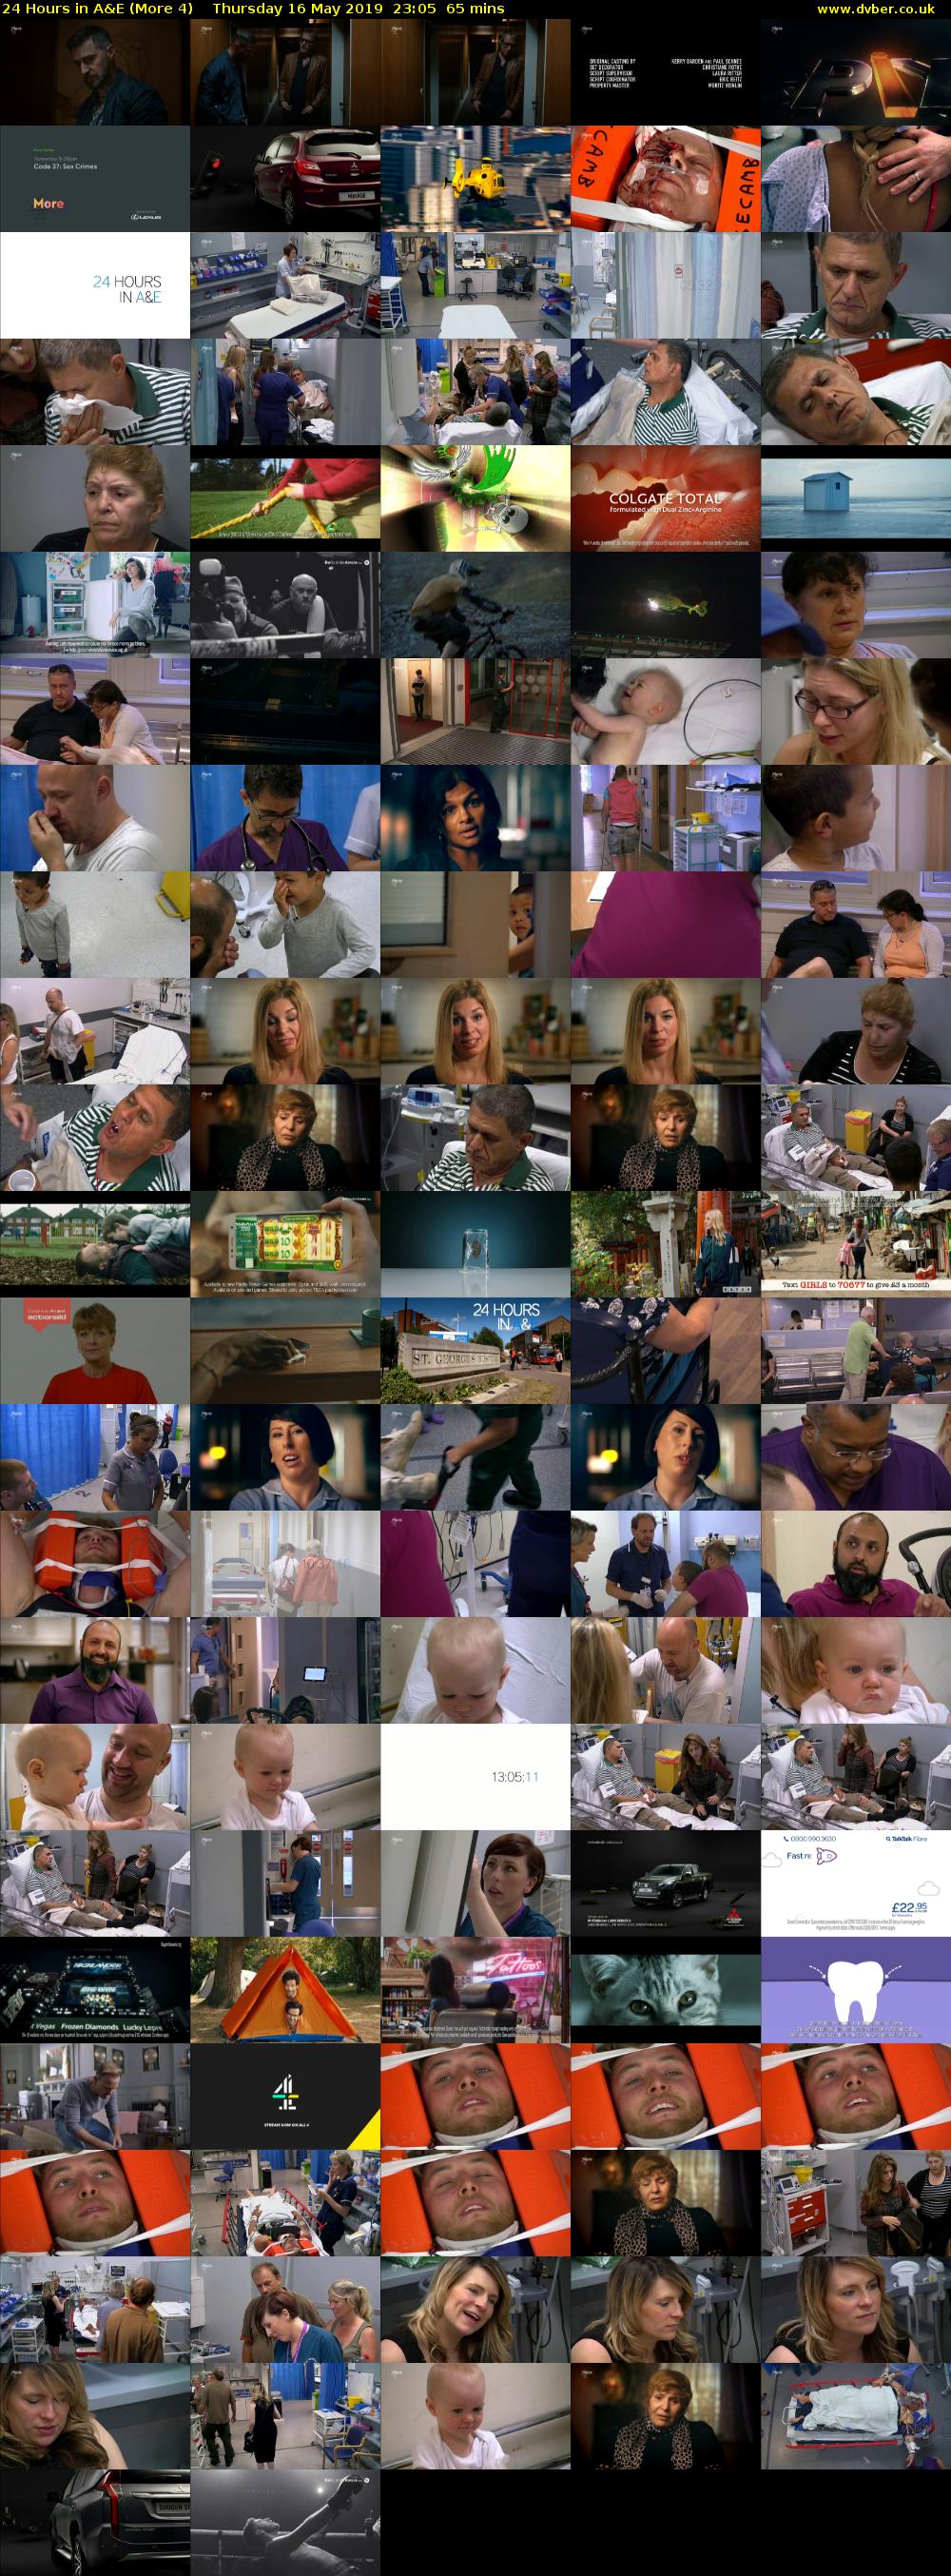 24 Hours in A&E (More 4) Thursday 16 May 2019 23:05 - 00:10